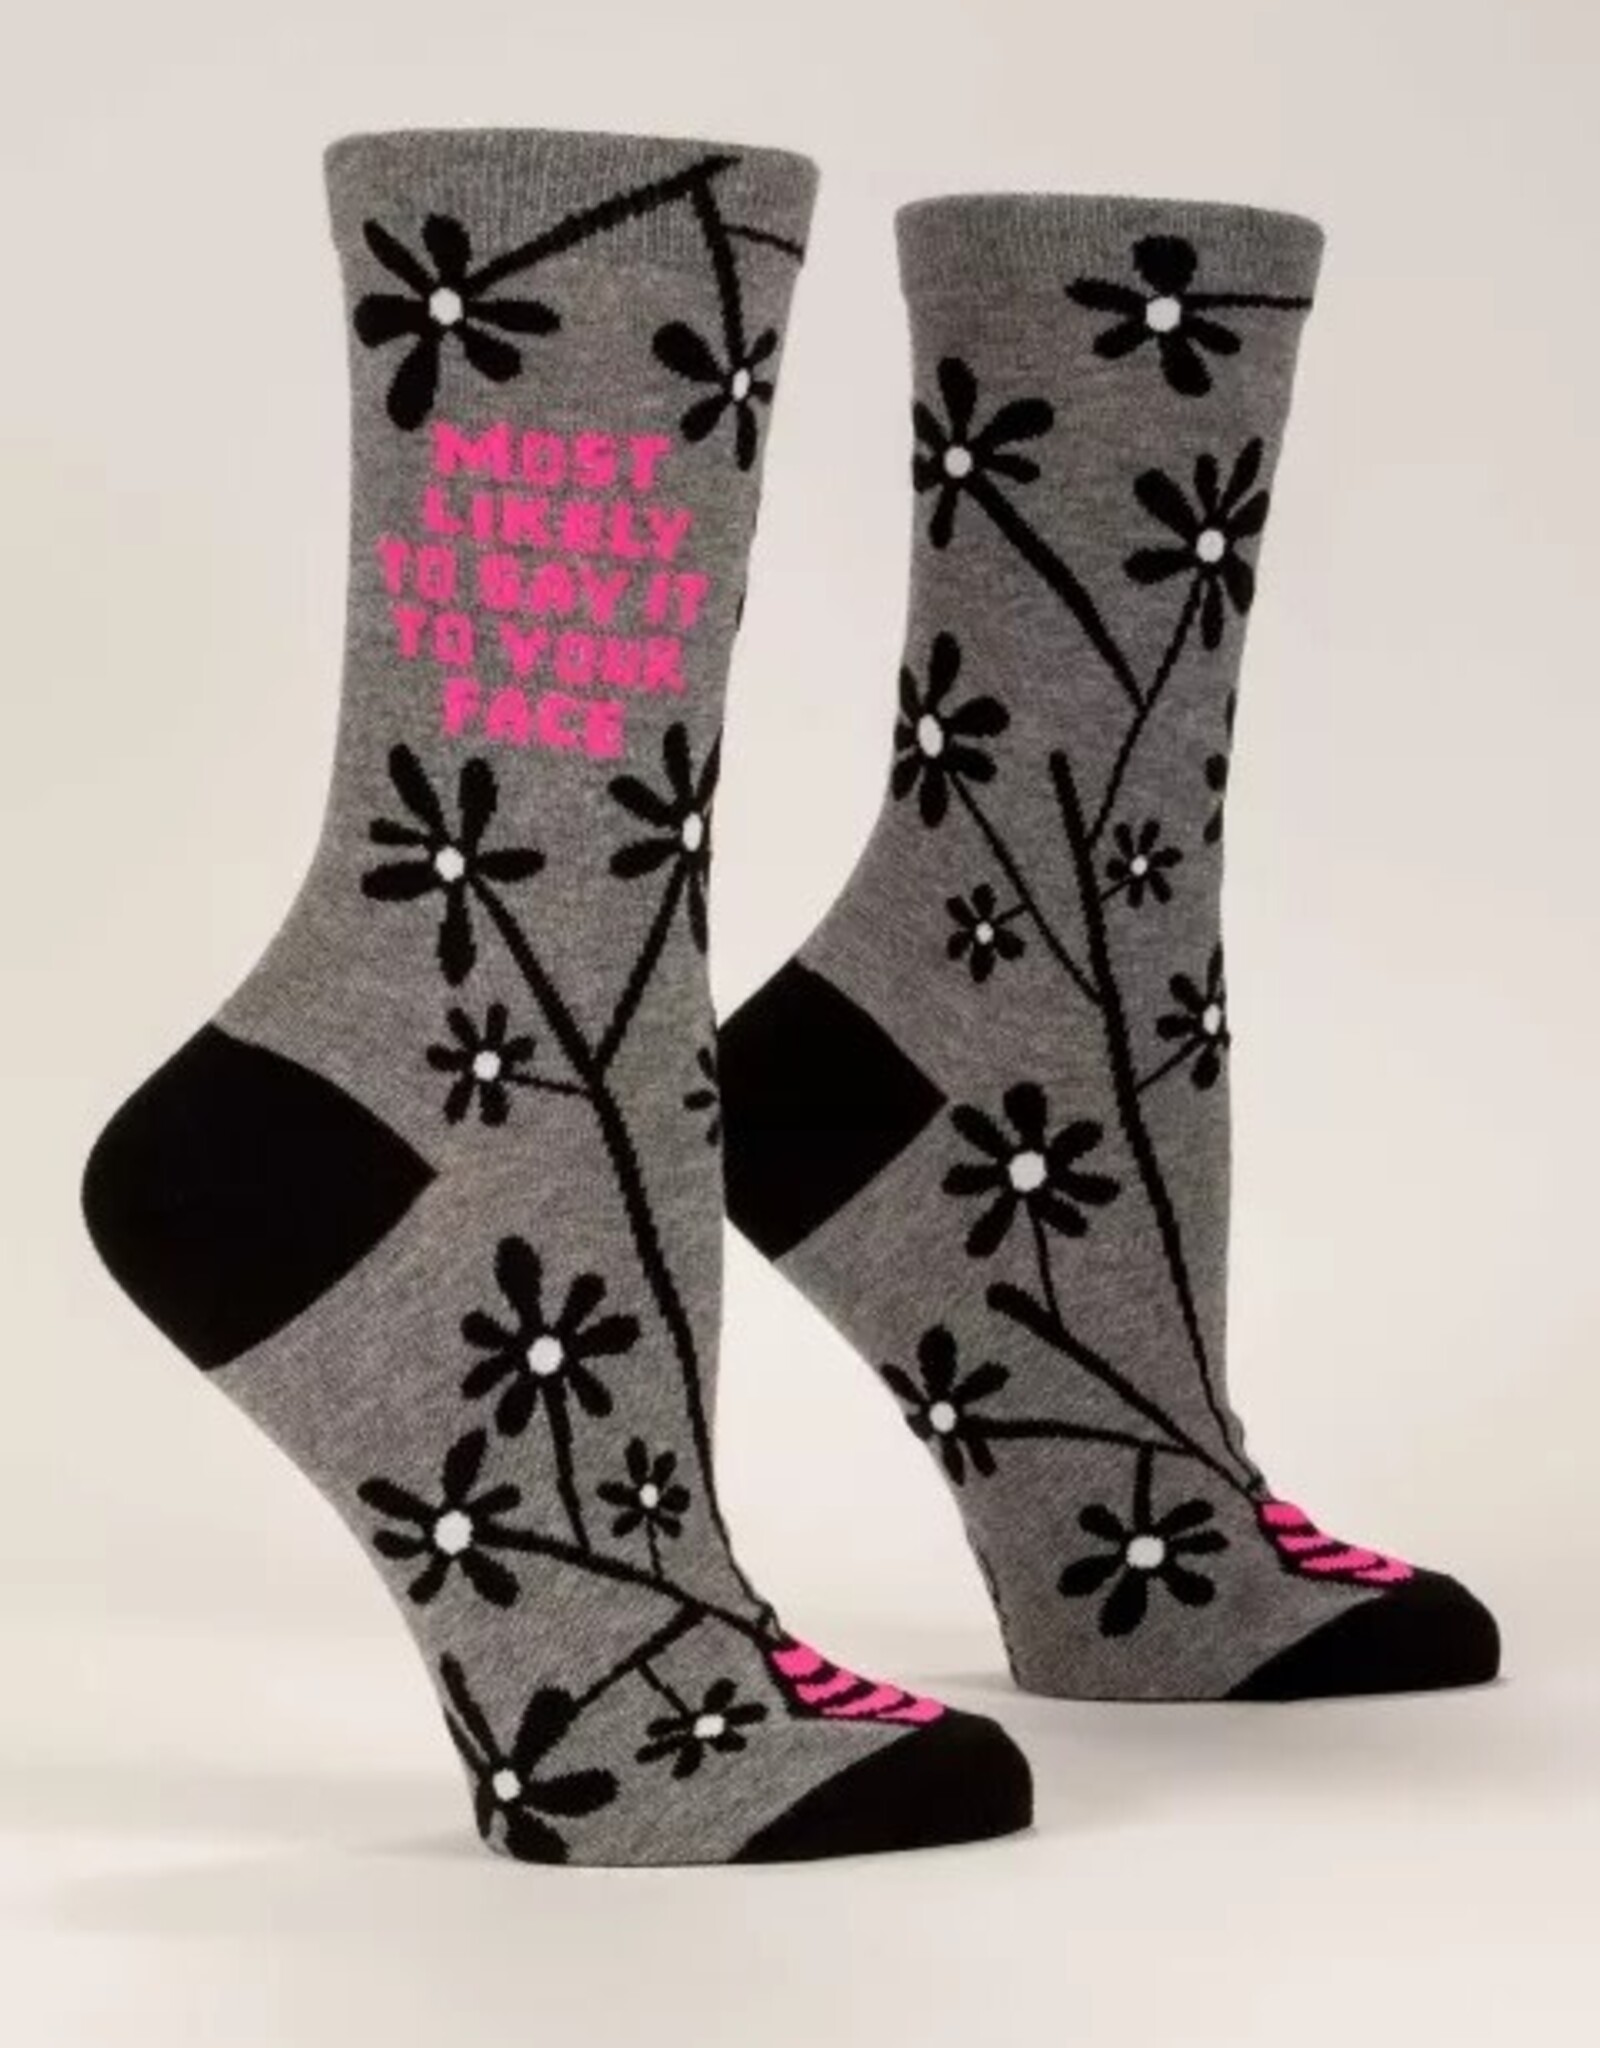 Most Likely to Say it to Your Face Women's Crew Socks